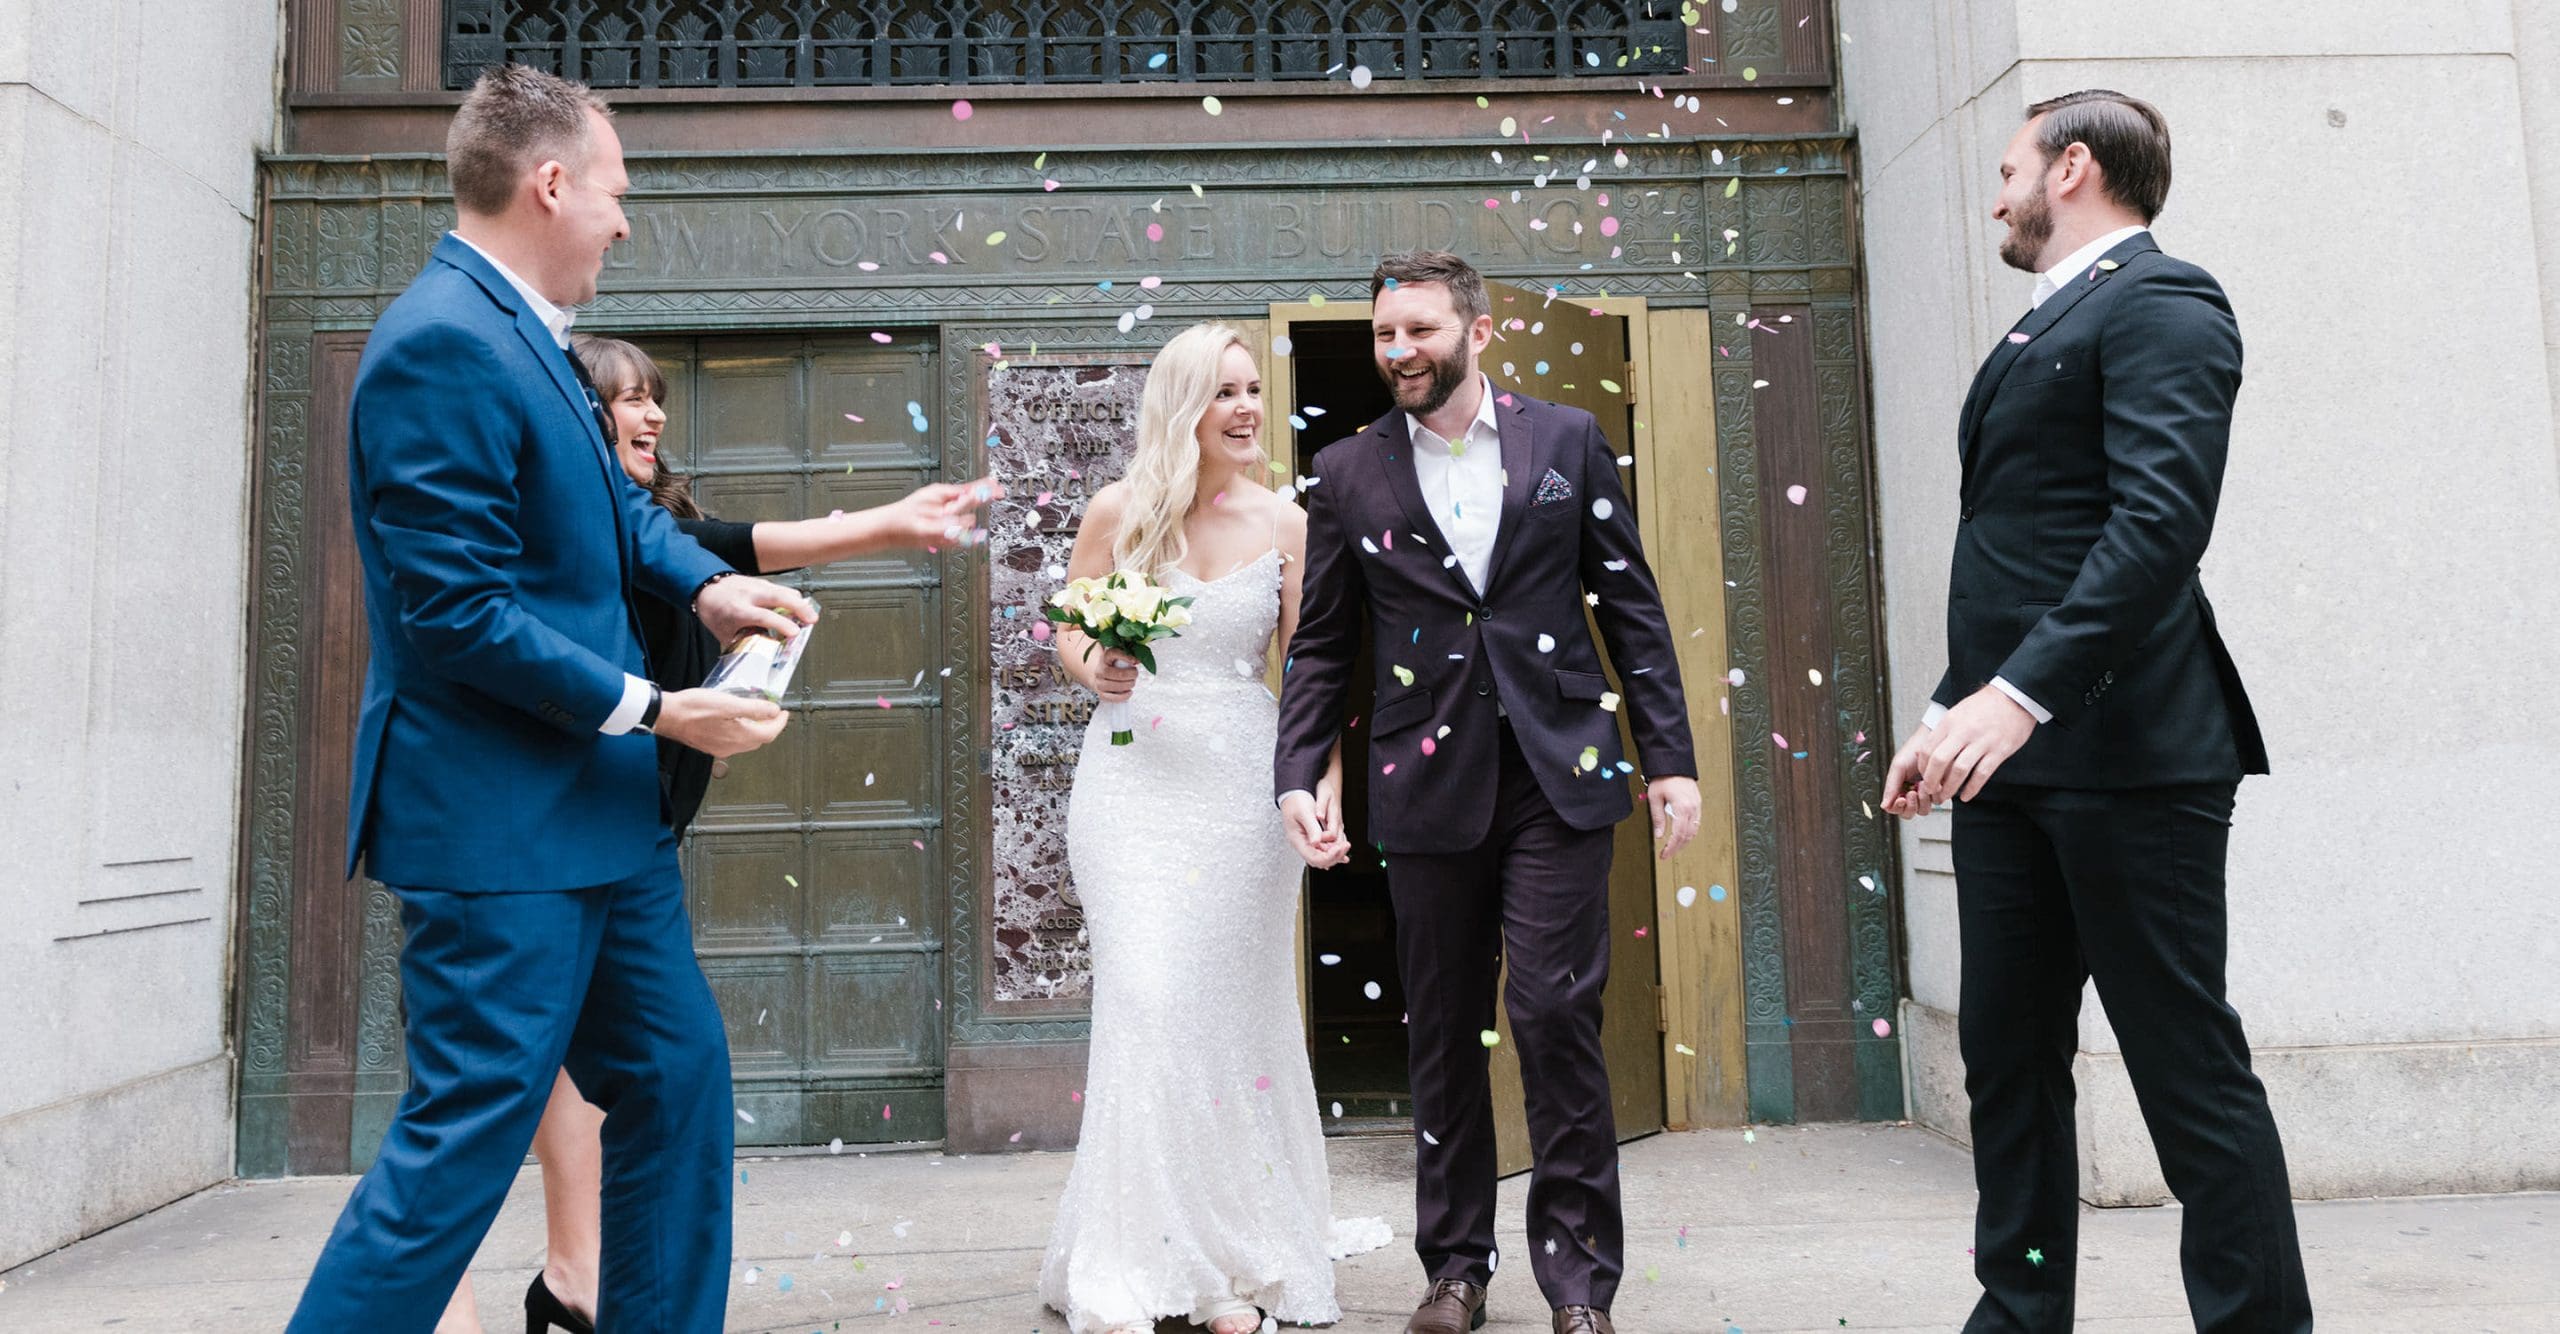 Getting Married in NYC for Foreigners